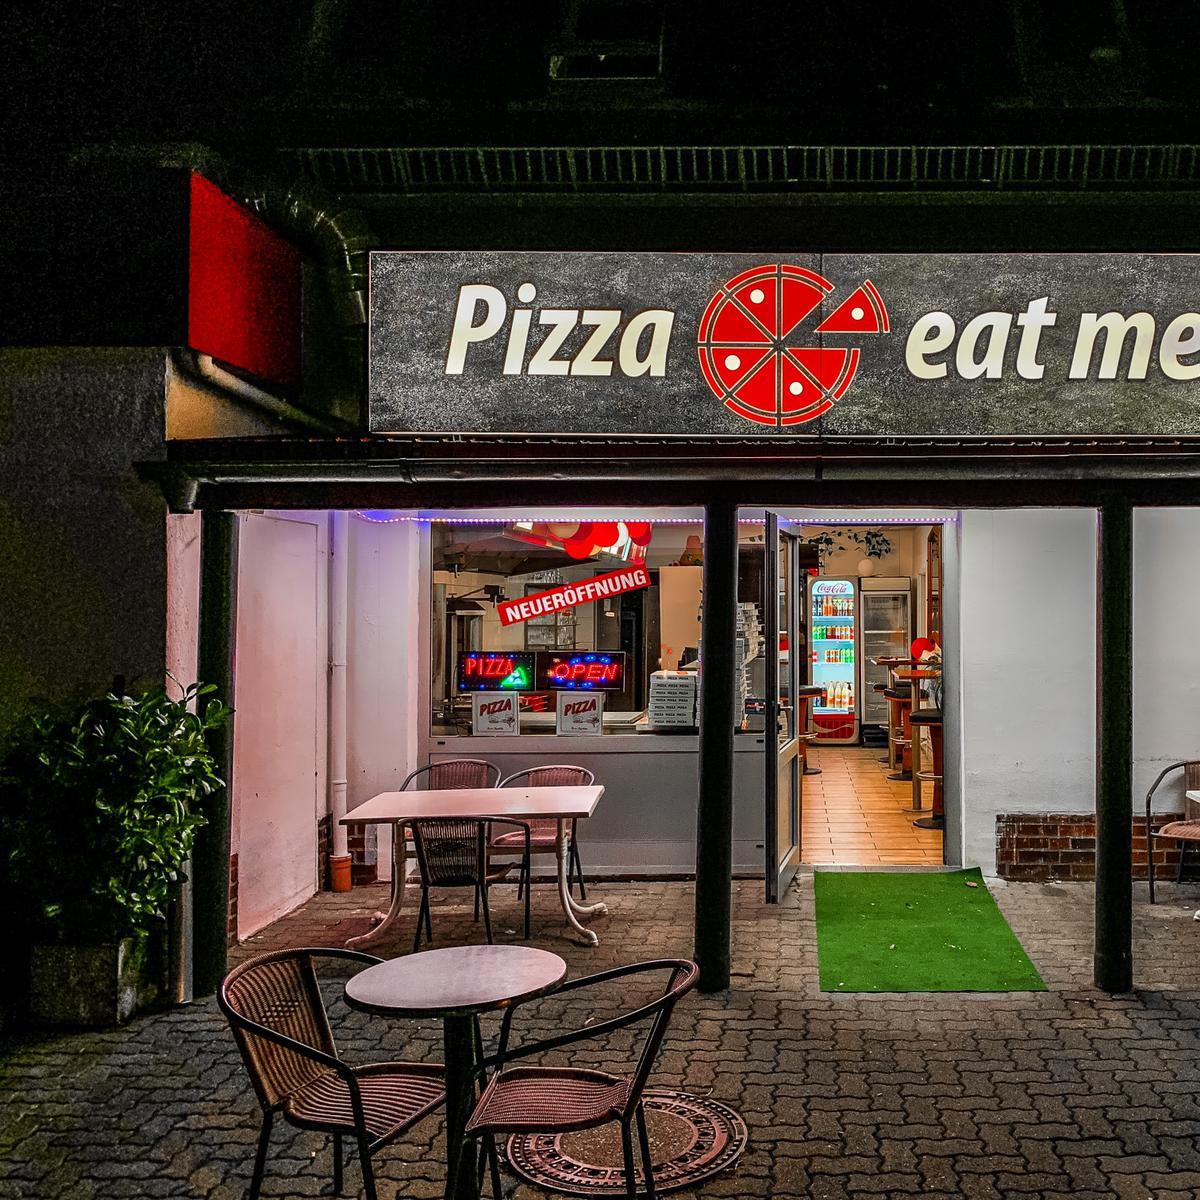 Restaurant "Pizzaeatme" in Hannover